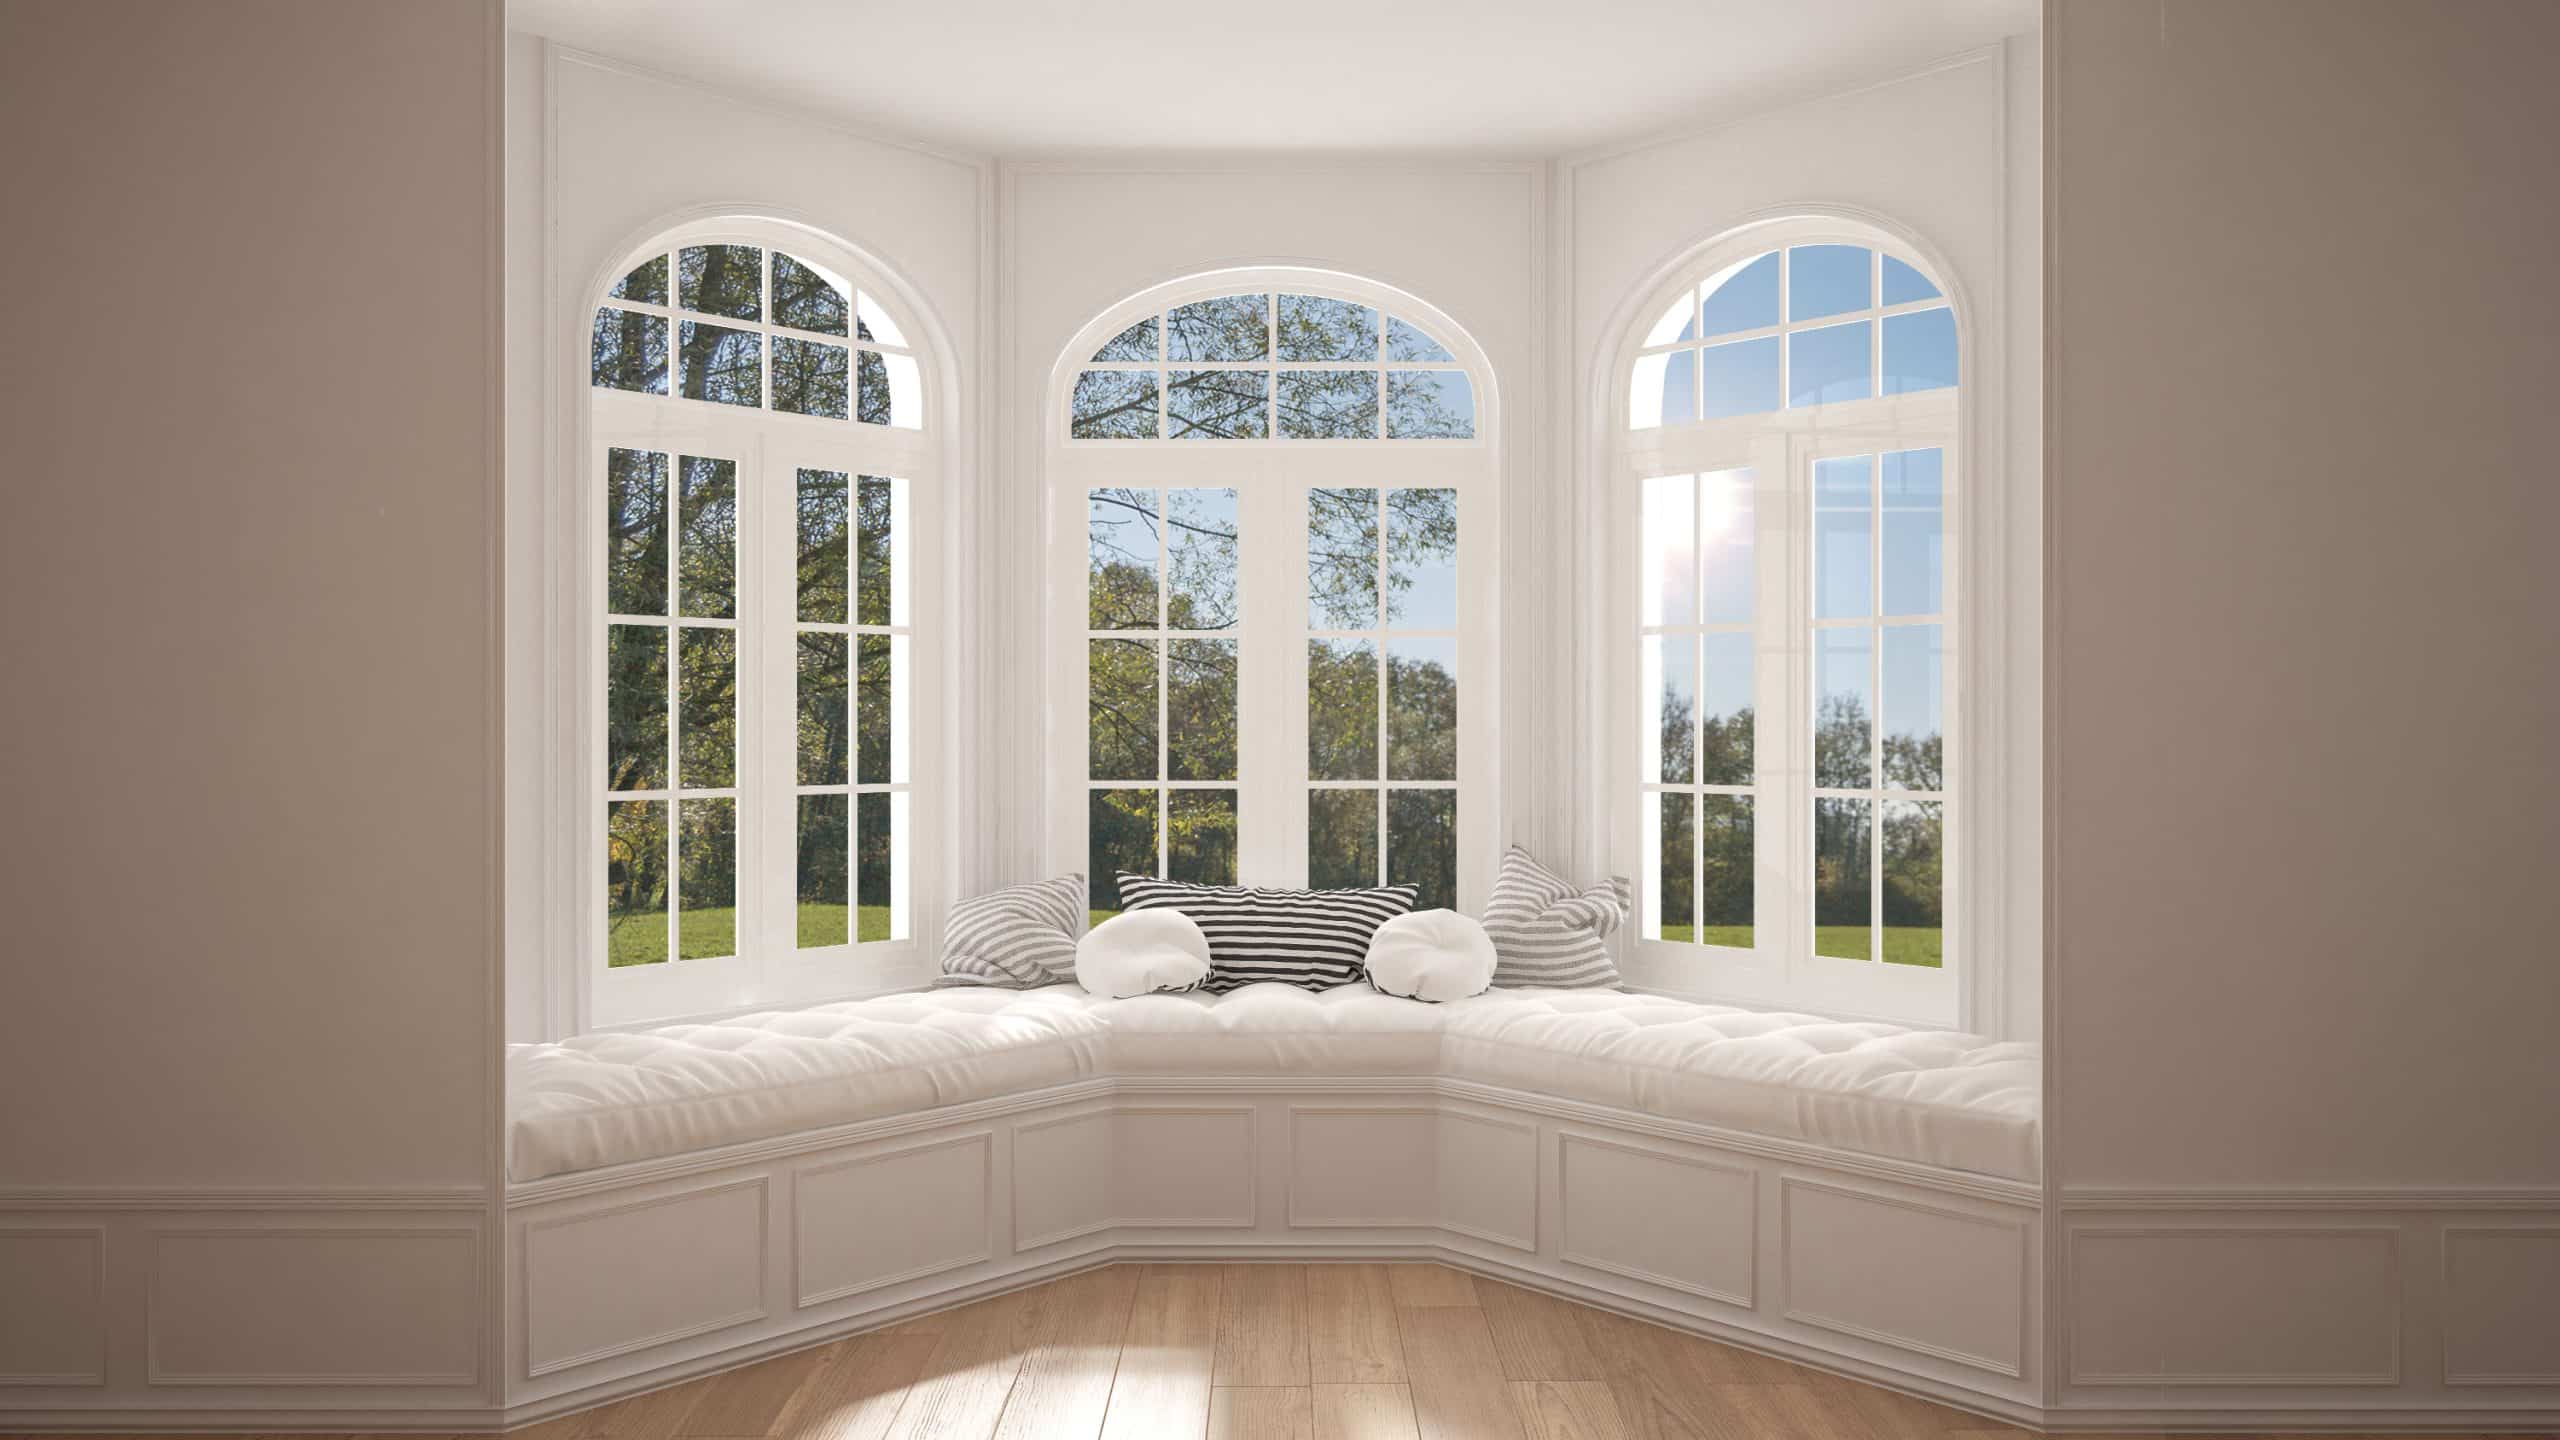 A bay window with reading nook all in light colors and trees out the windows